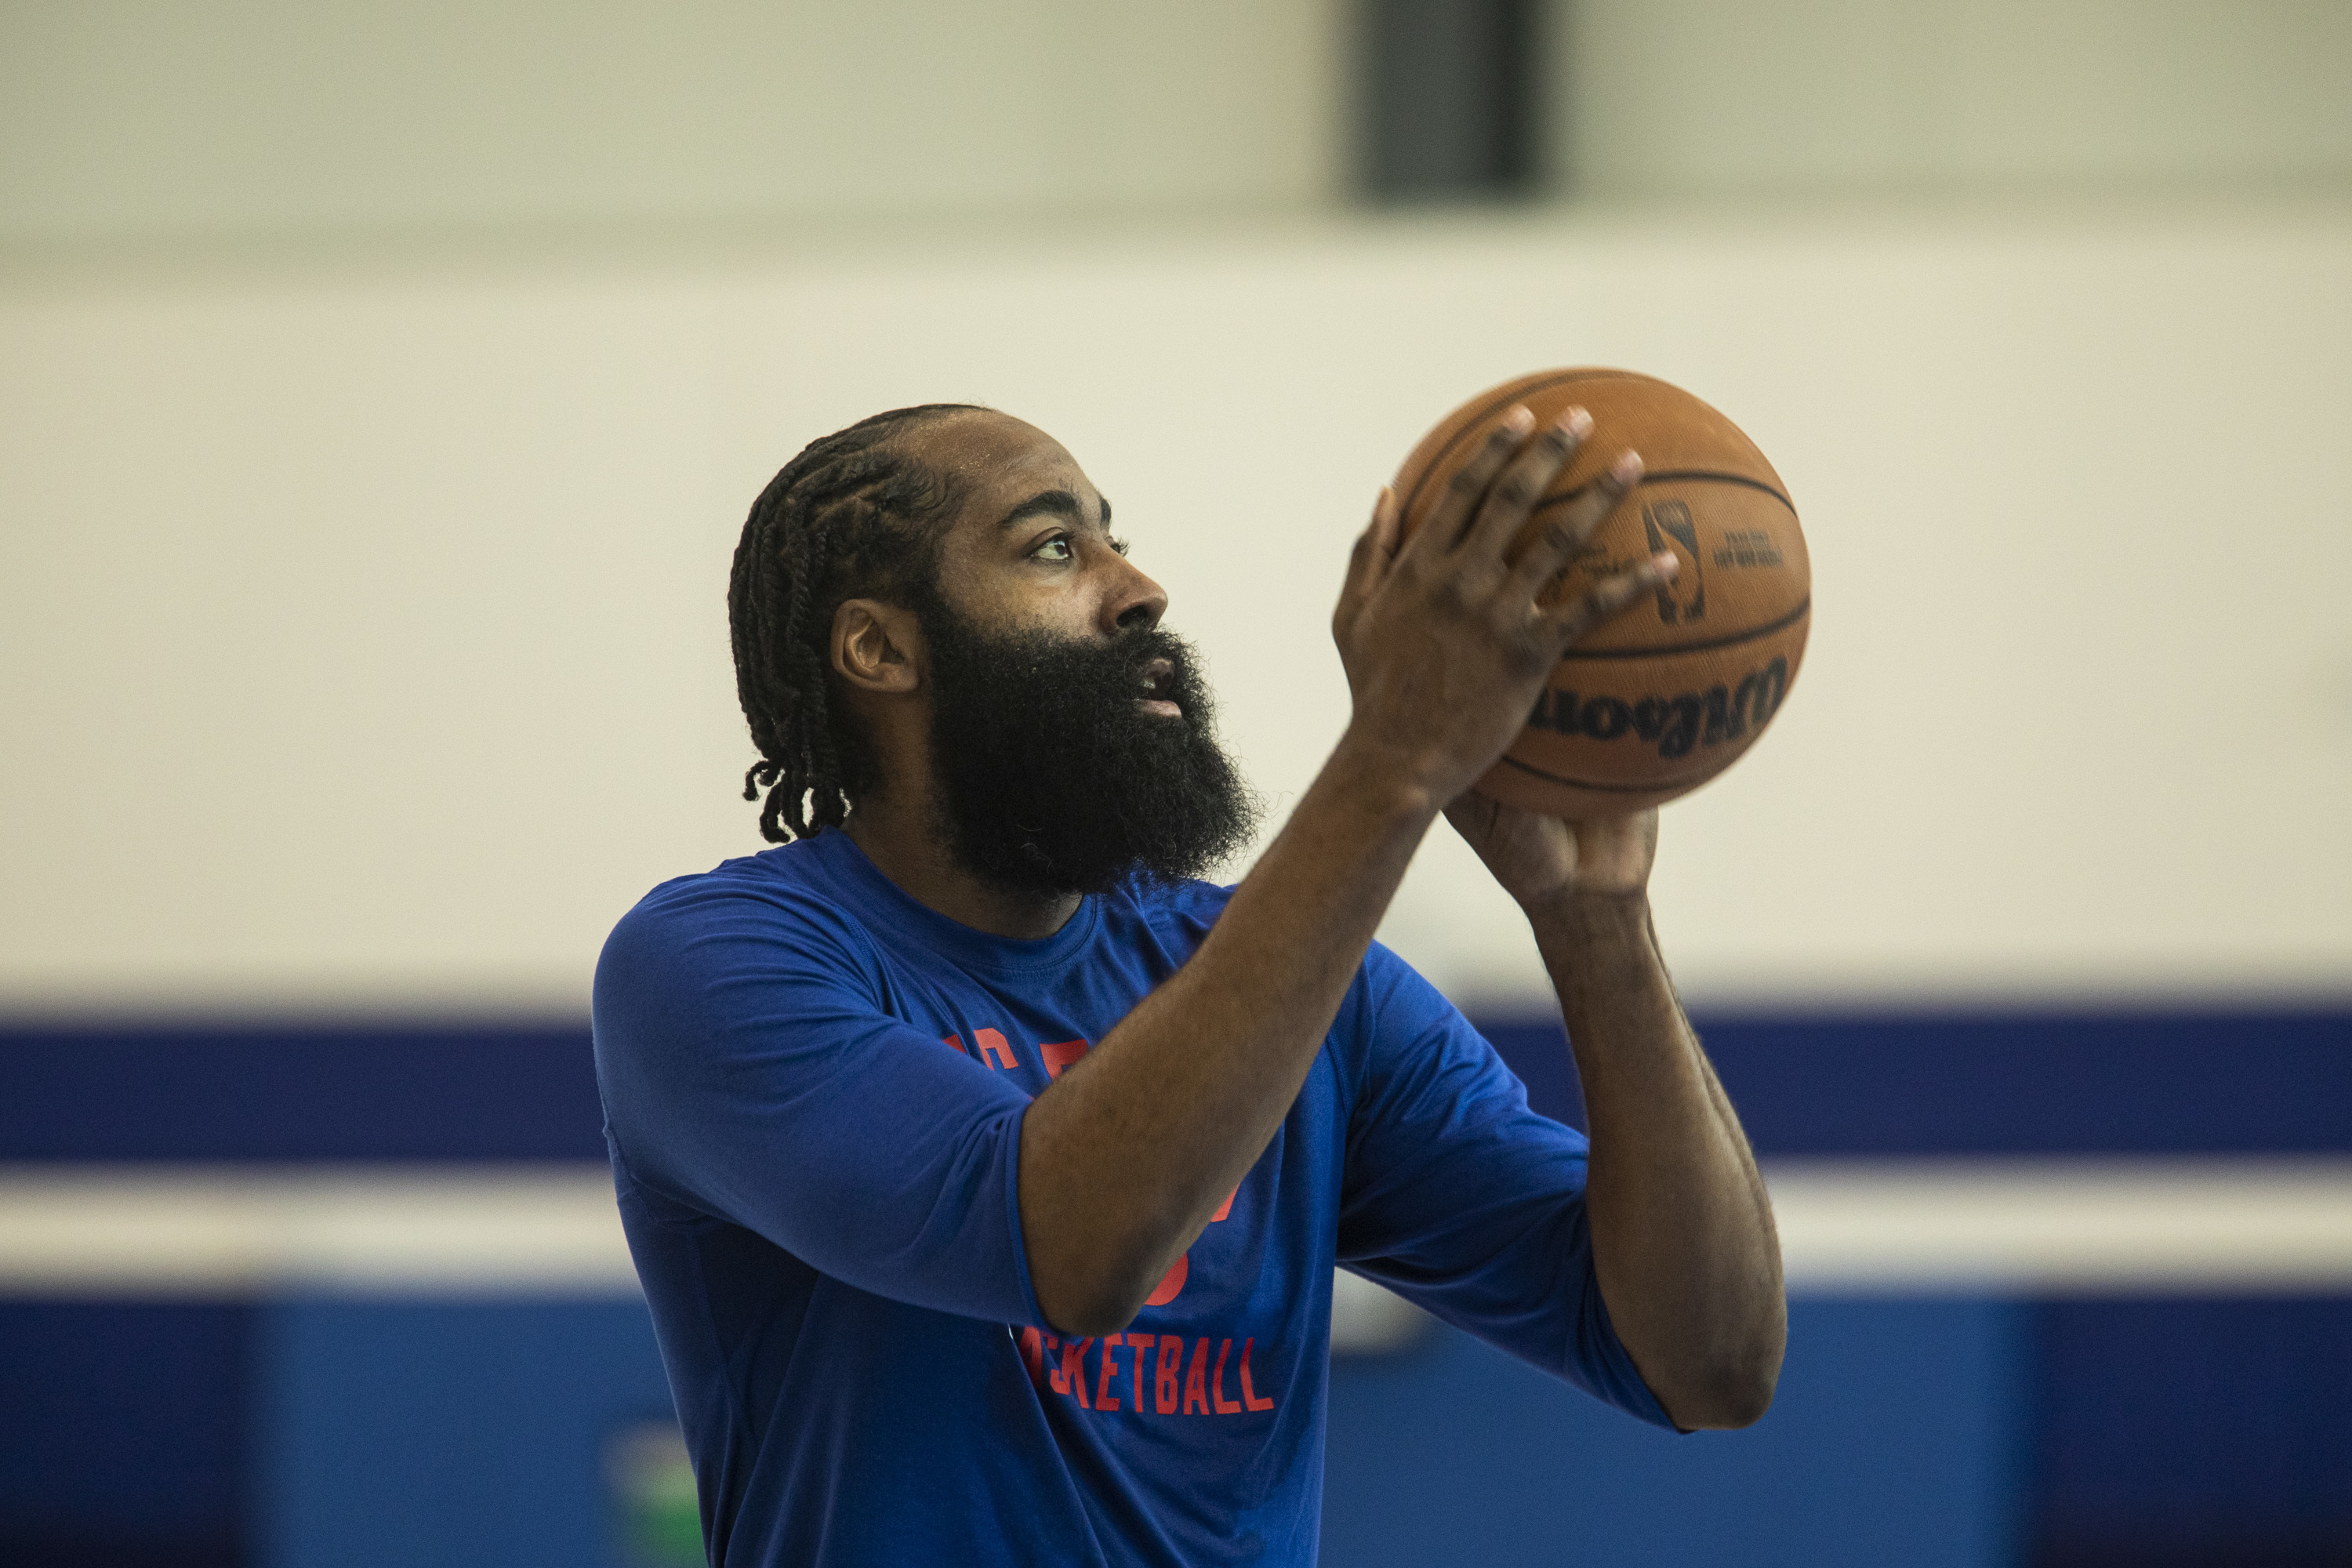 James Harden excited to show off full game as Sixers prepare for Nets